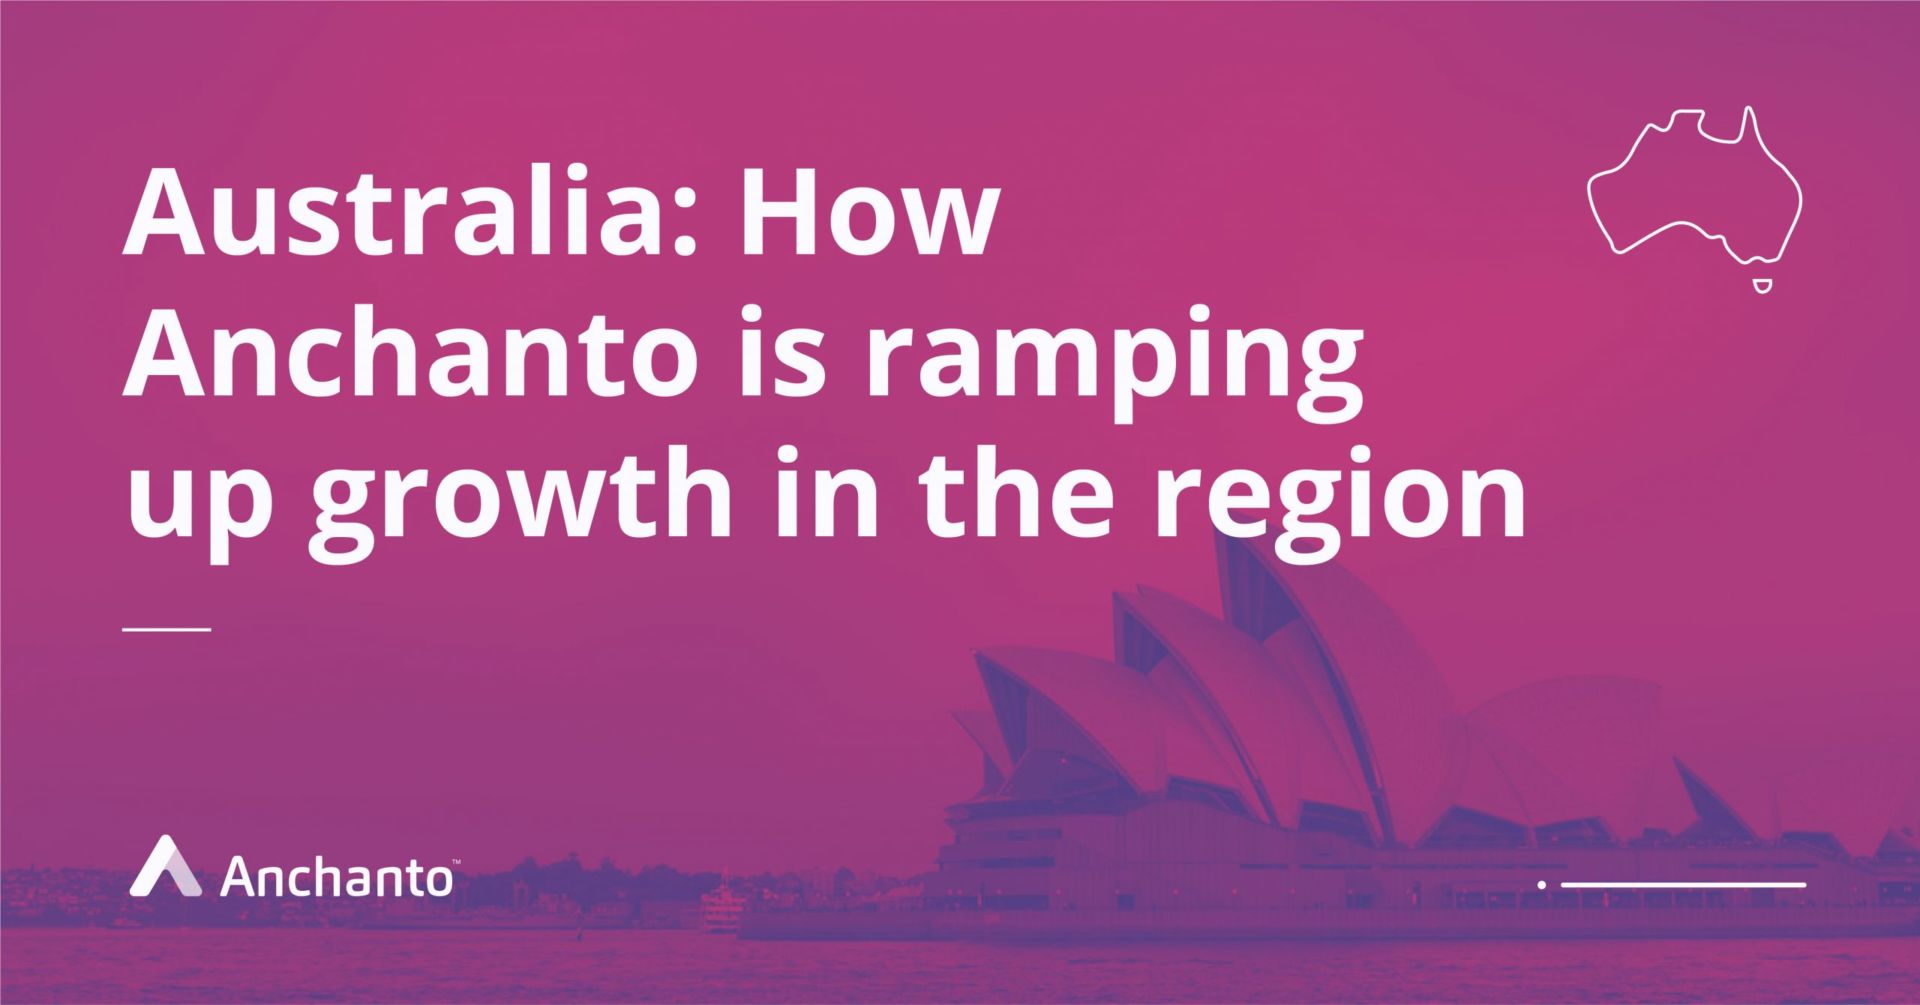 Australia: How Anchanto is ramping up growth in the region